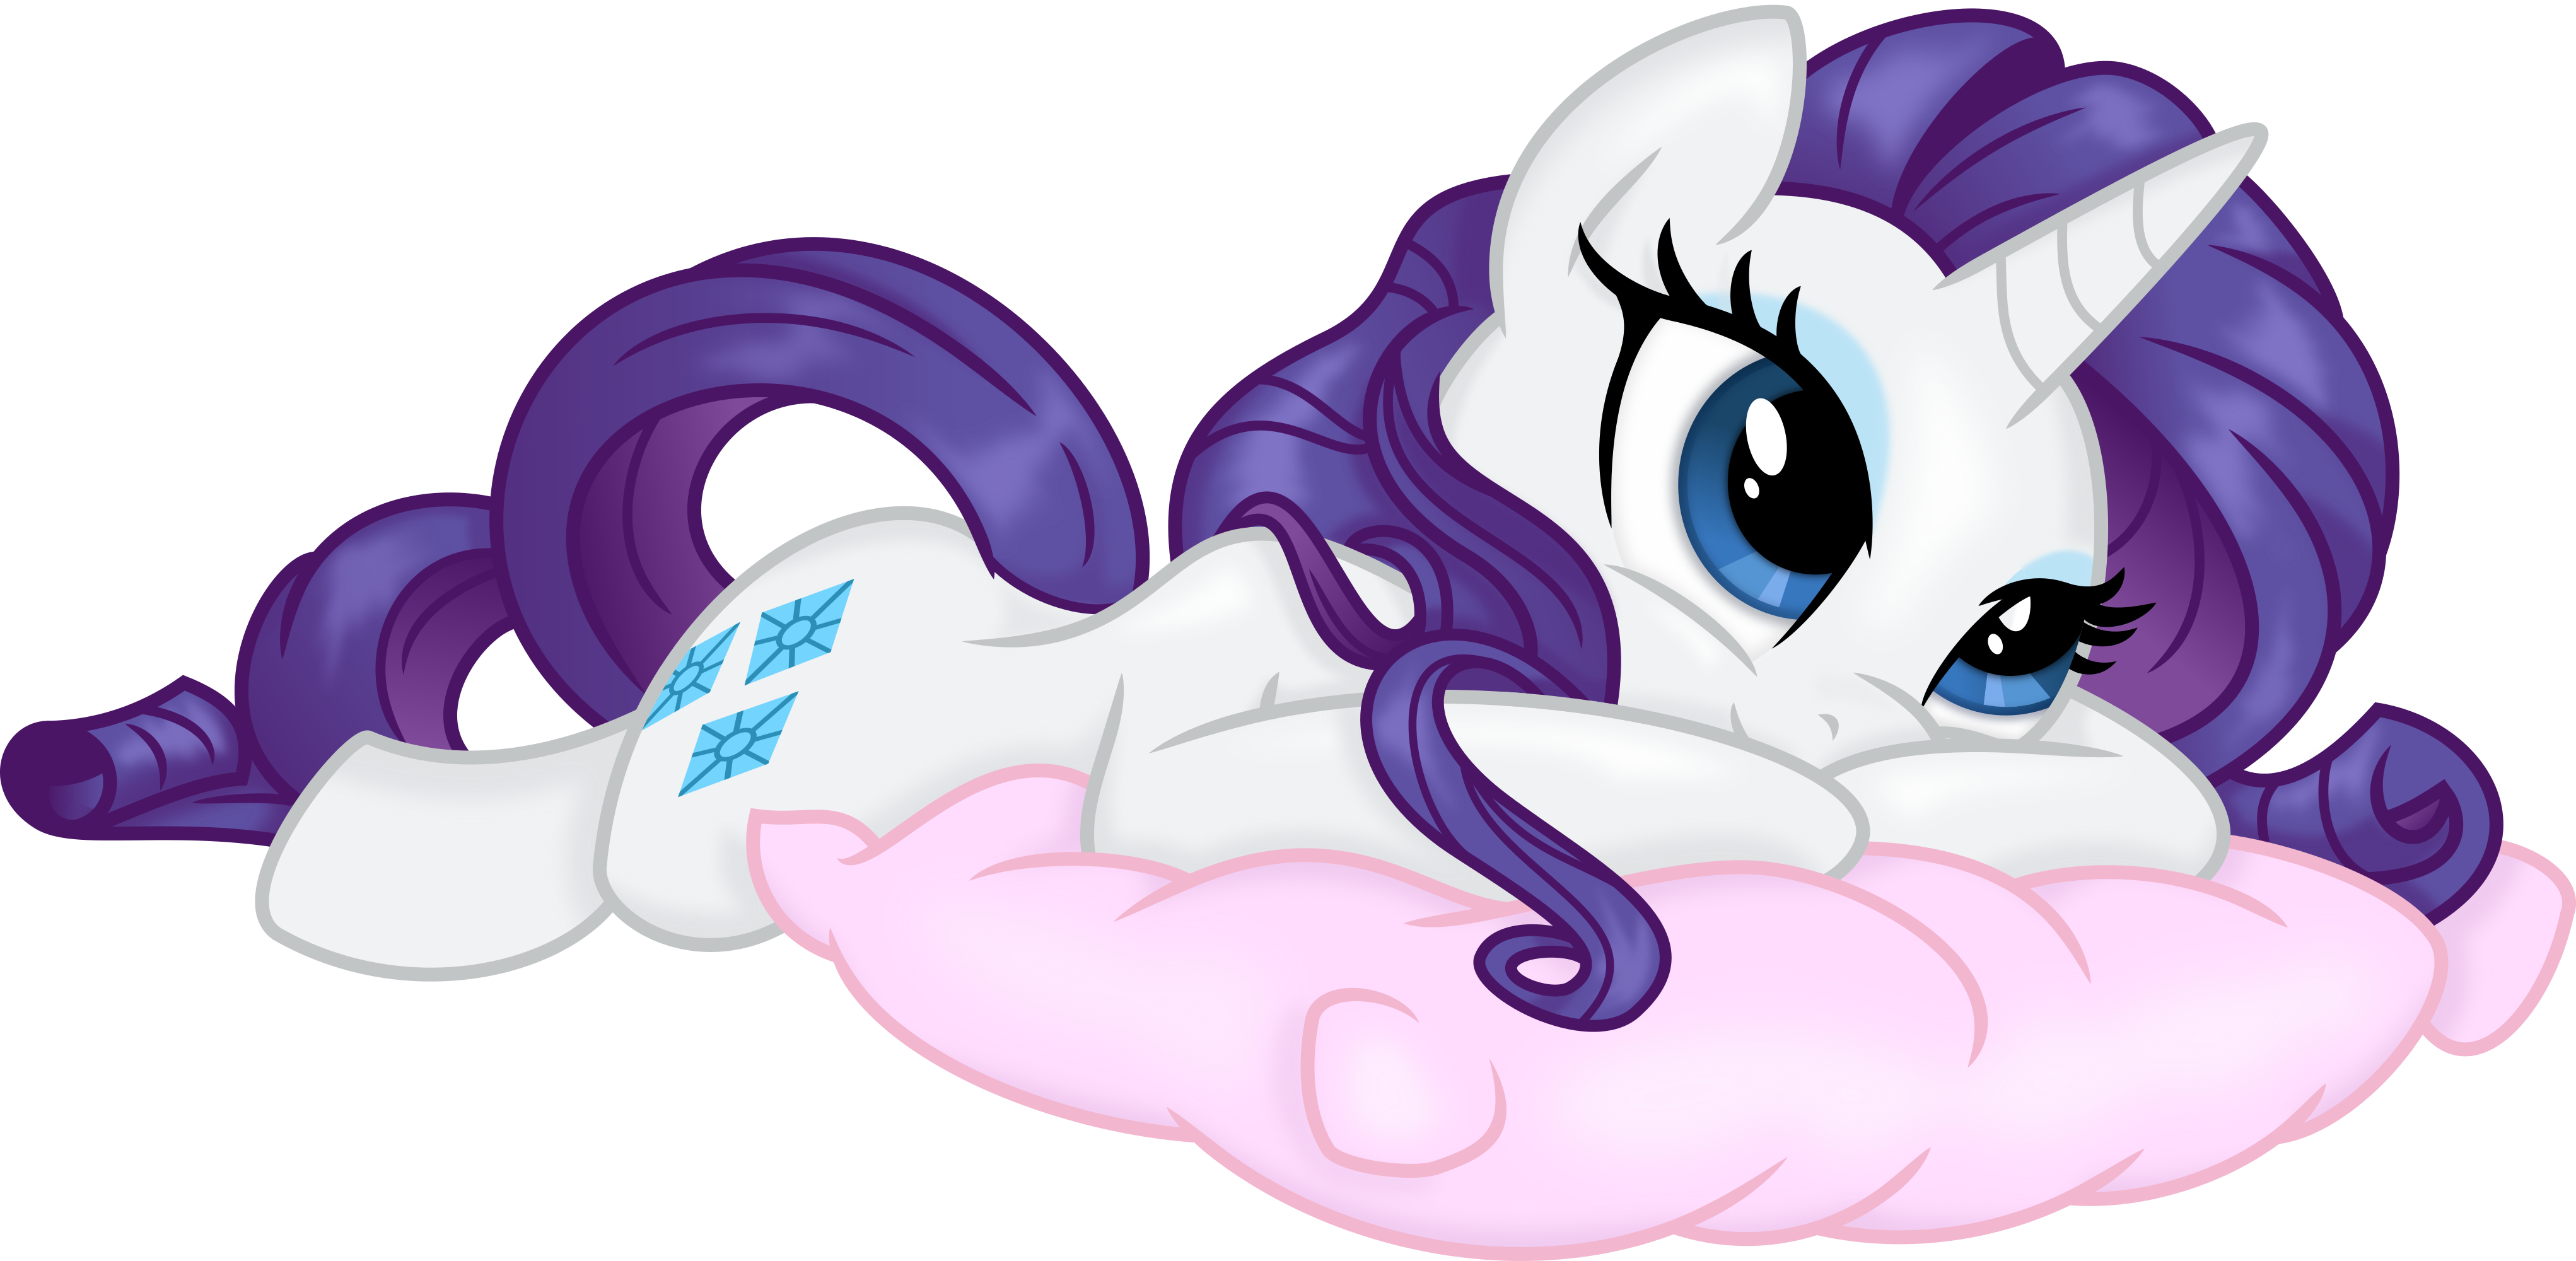 Image result for cute rarity